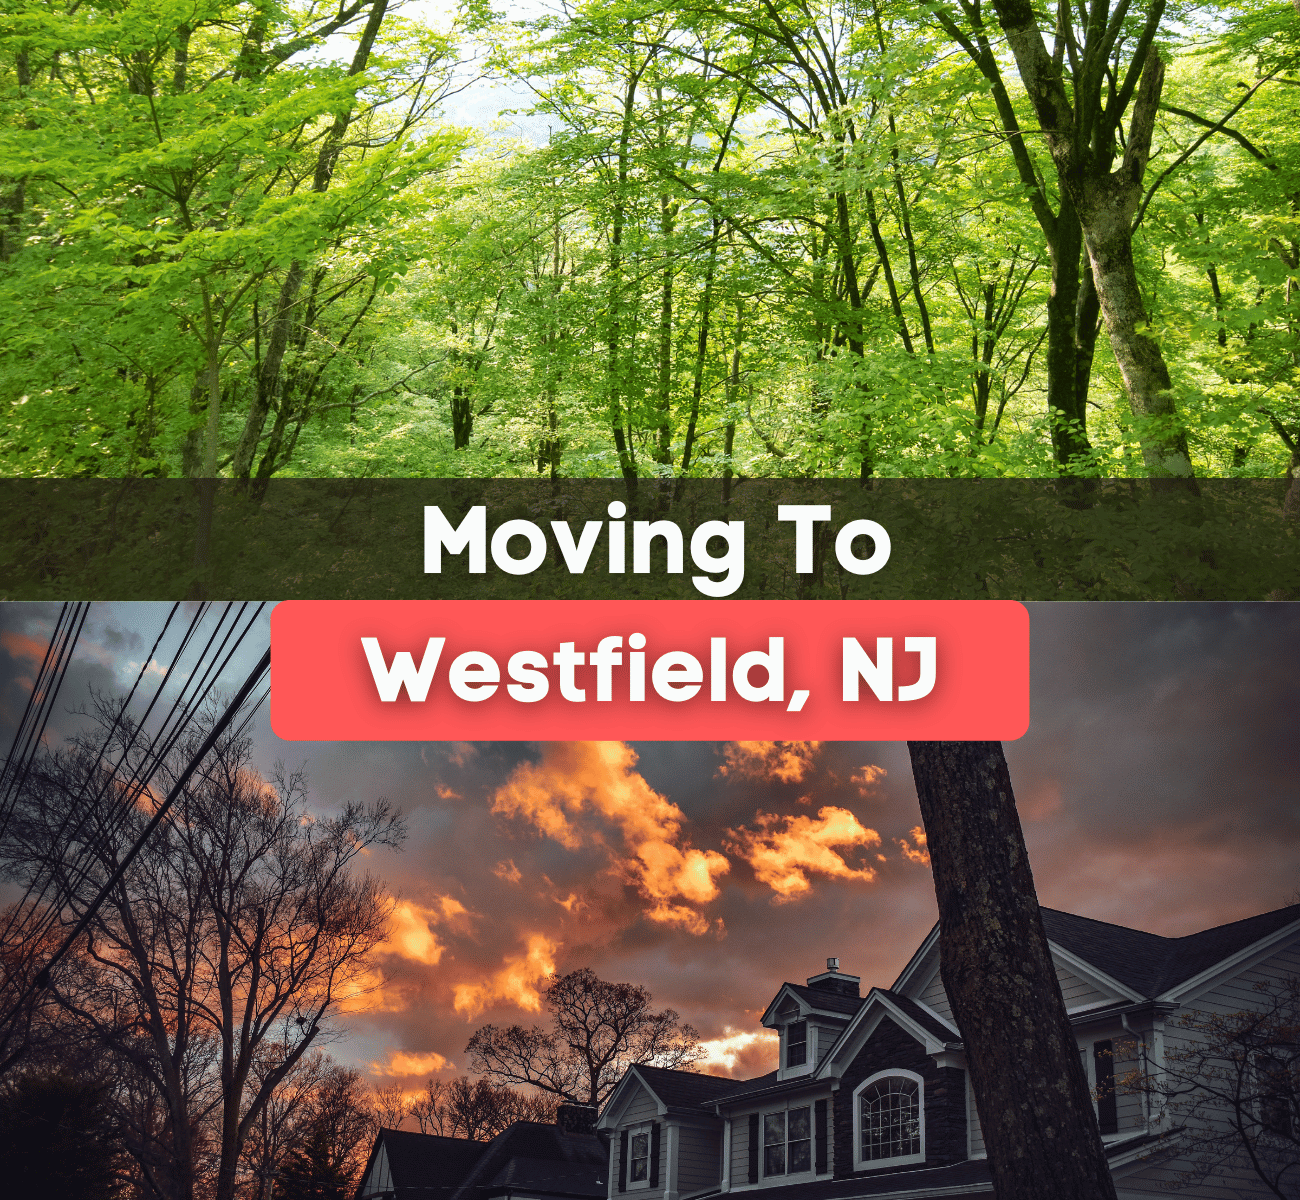 moving to Westfield, NJ graphic with wooded area and sunset sky